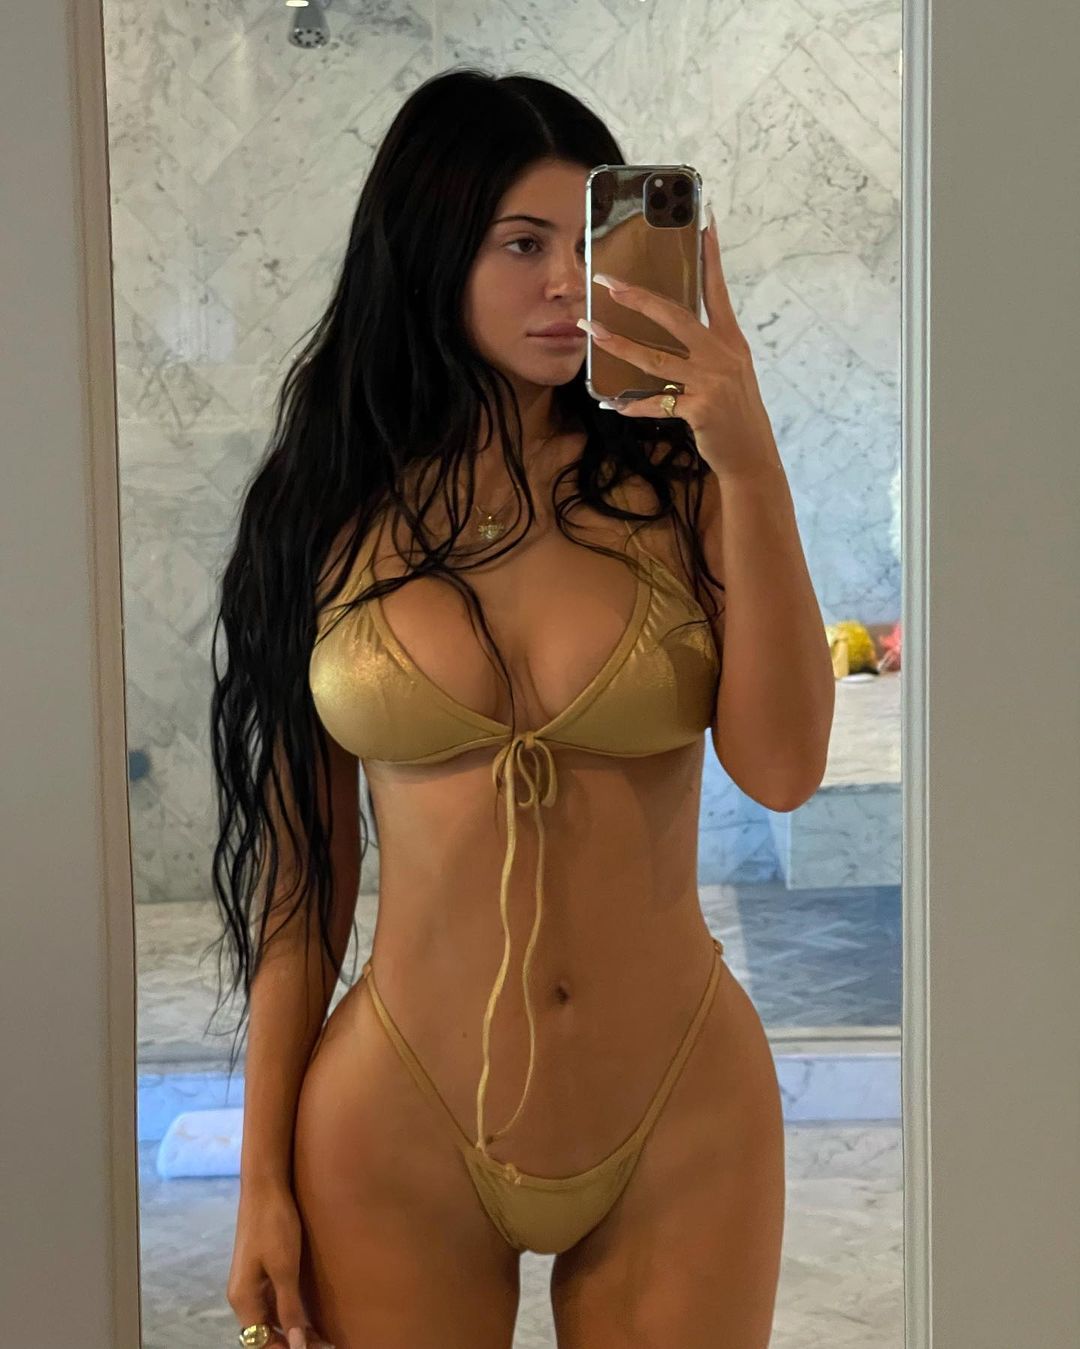 Erotic stories kylie jenner